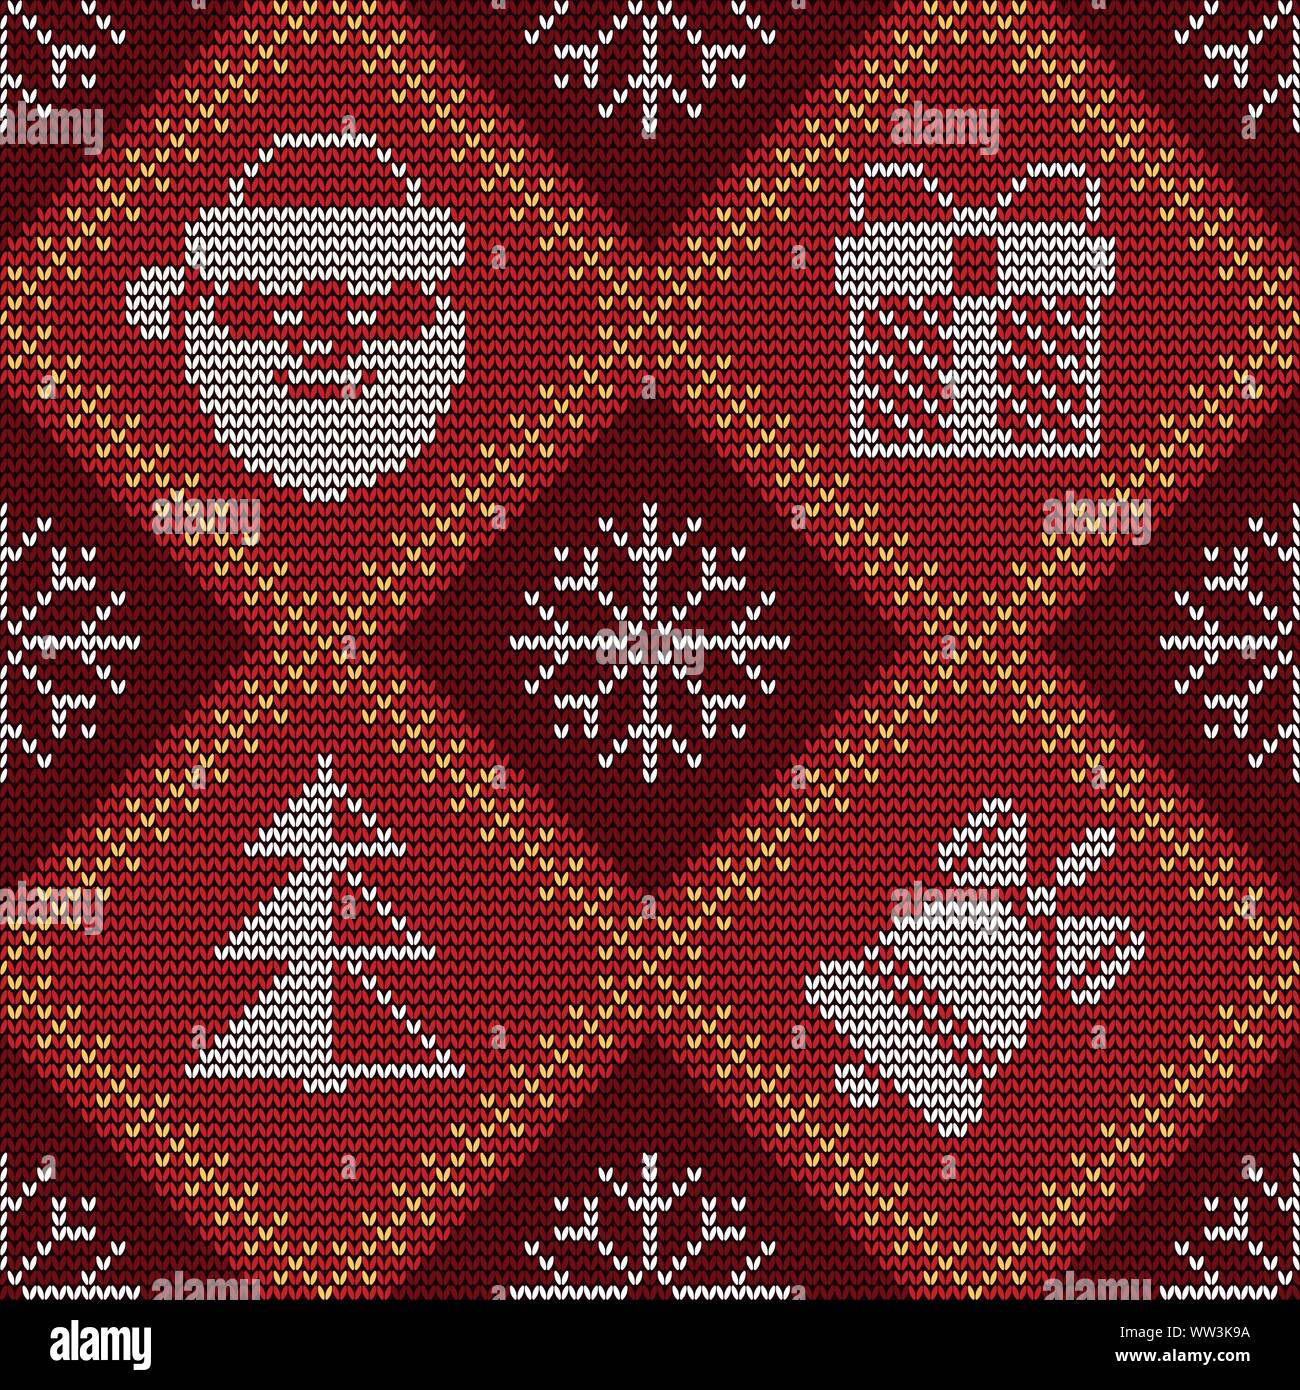 Christmas knitted seamless pattern on red knitted texture. Good for wrapping. All elements are on separate layers. Easy to edit color of all elements. Stock Vector